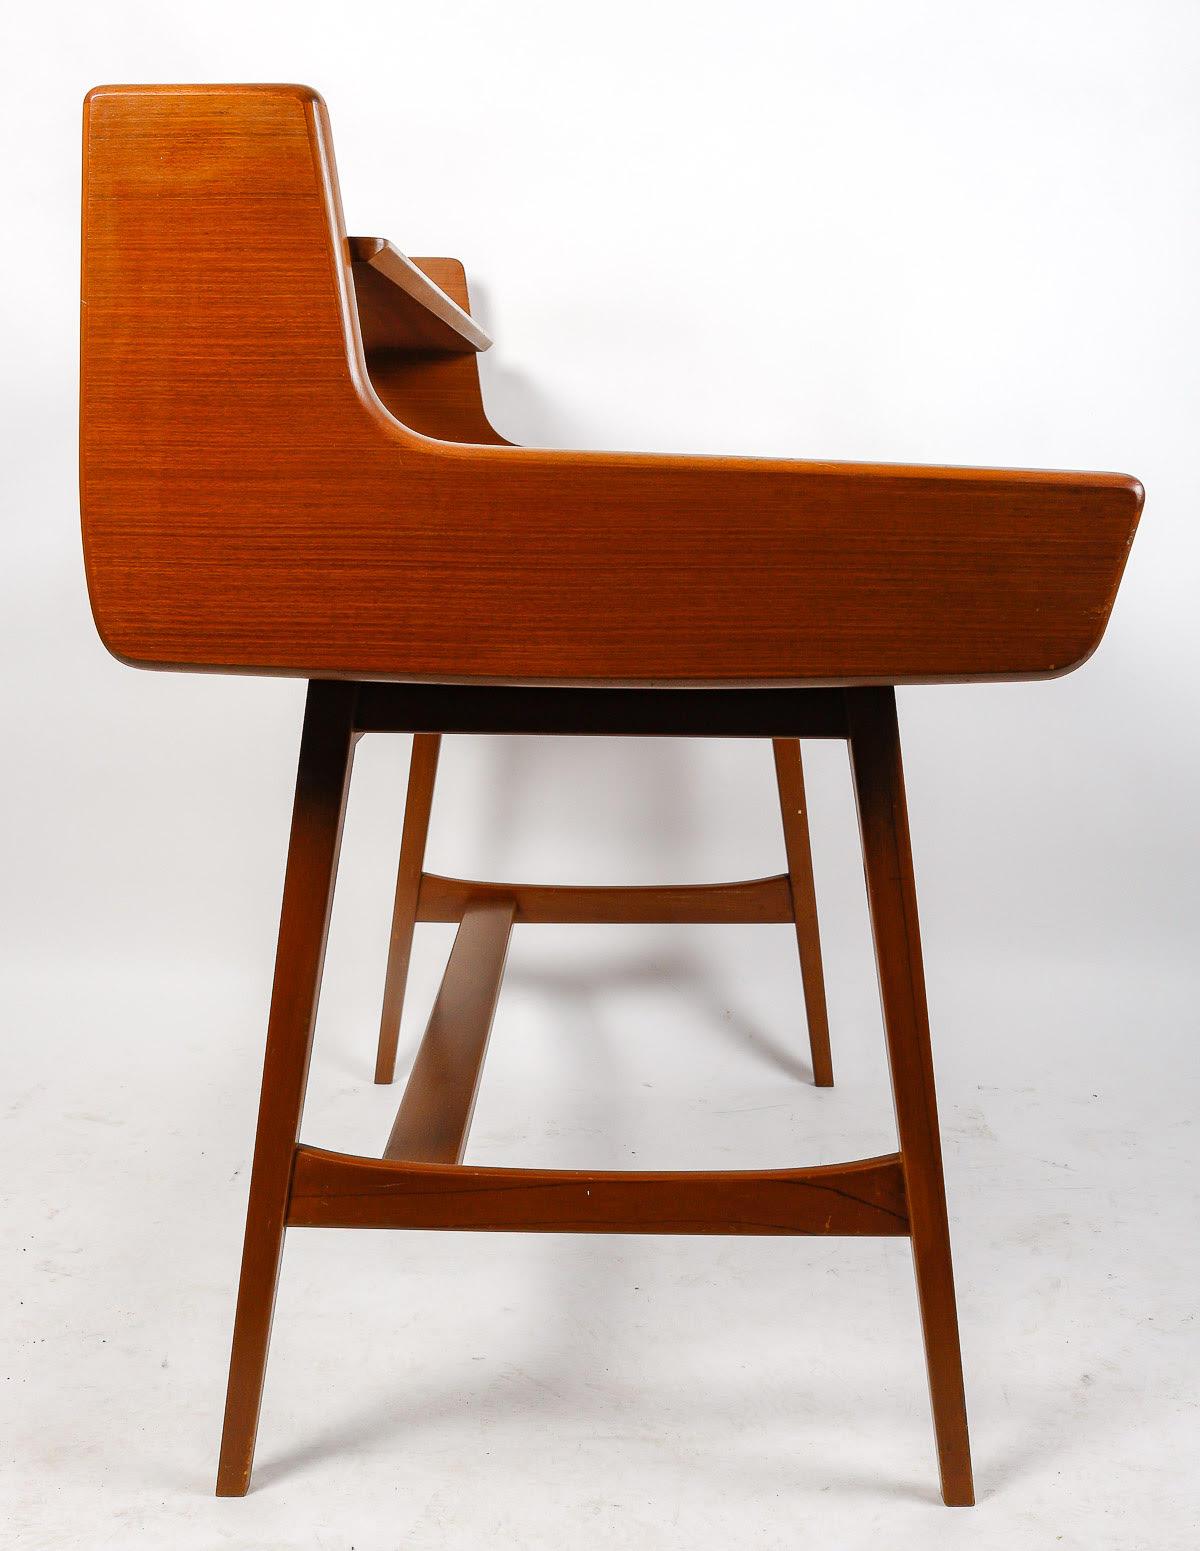 20th Century Desk by Jacques Hauville, circa 1960.